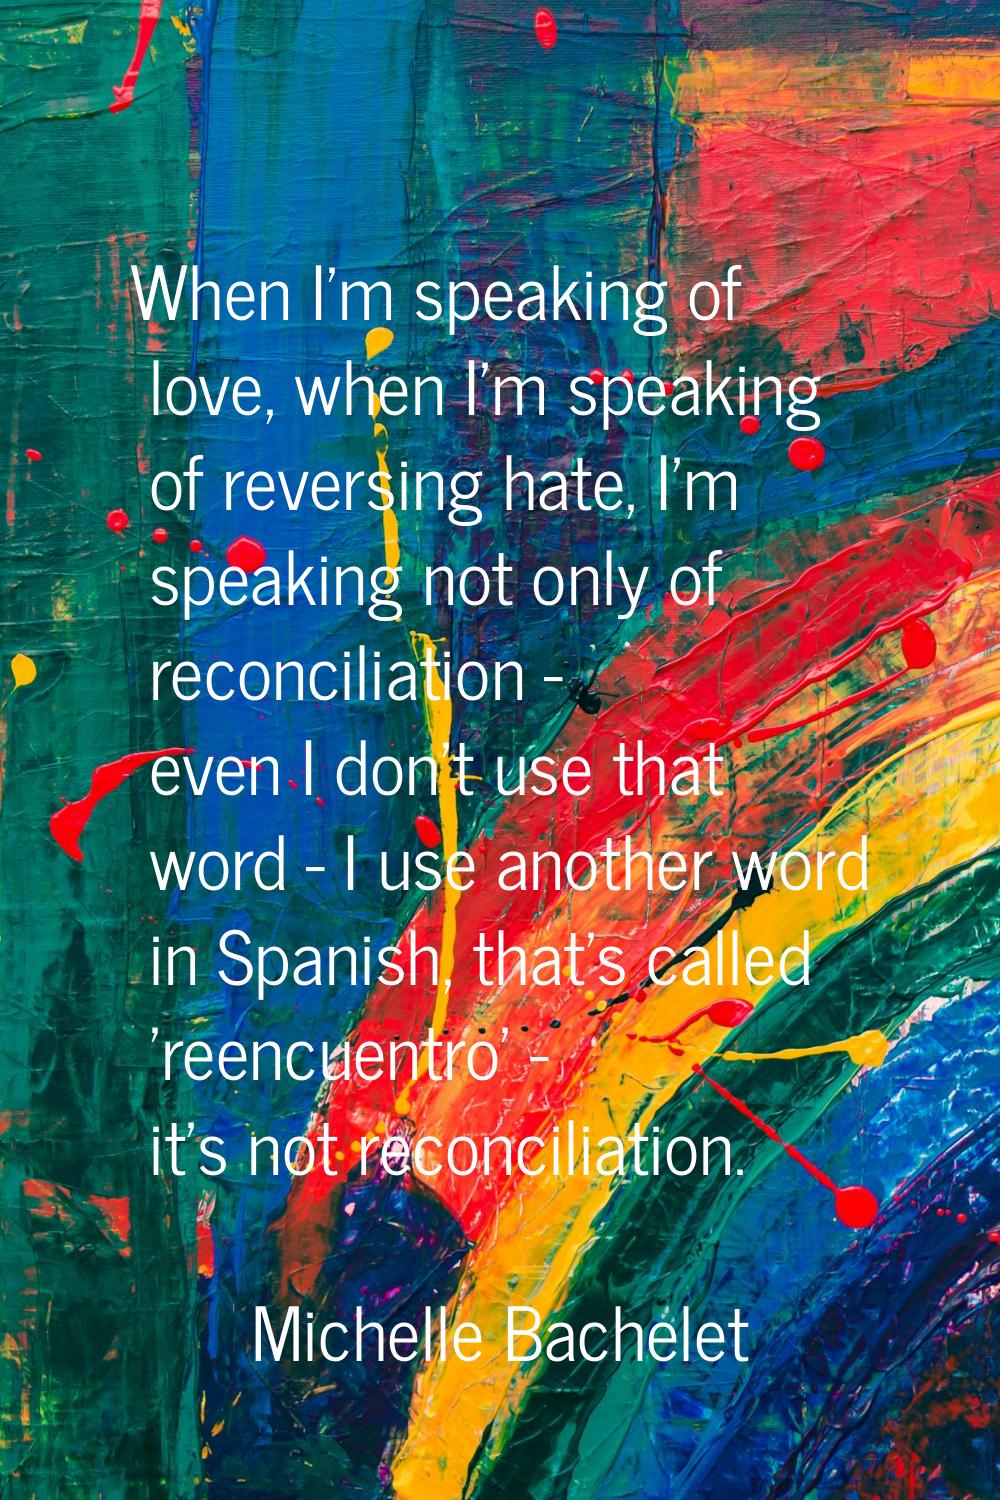 When I'm speaking of love, when I'm speaking of reversing hate, I'm speaking not only of reconcilia